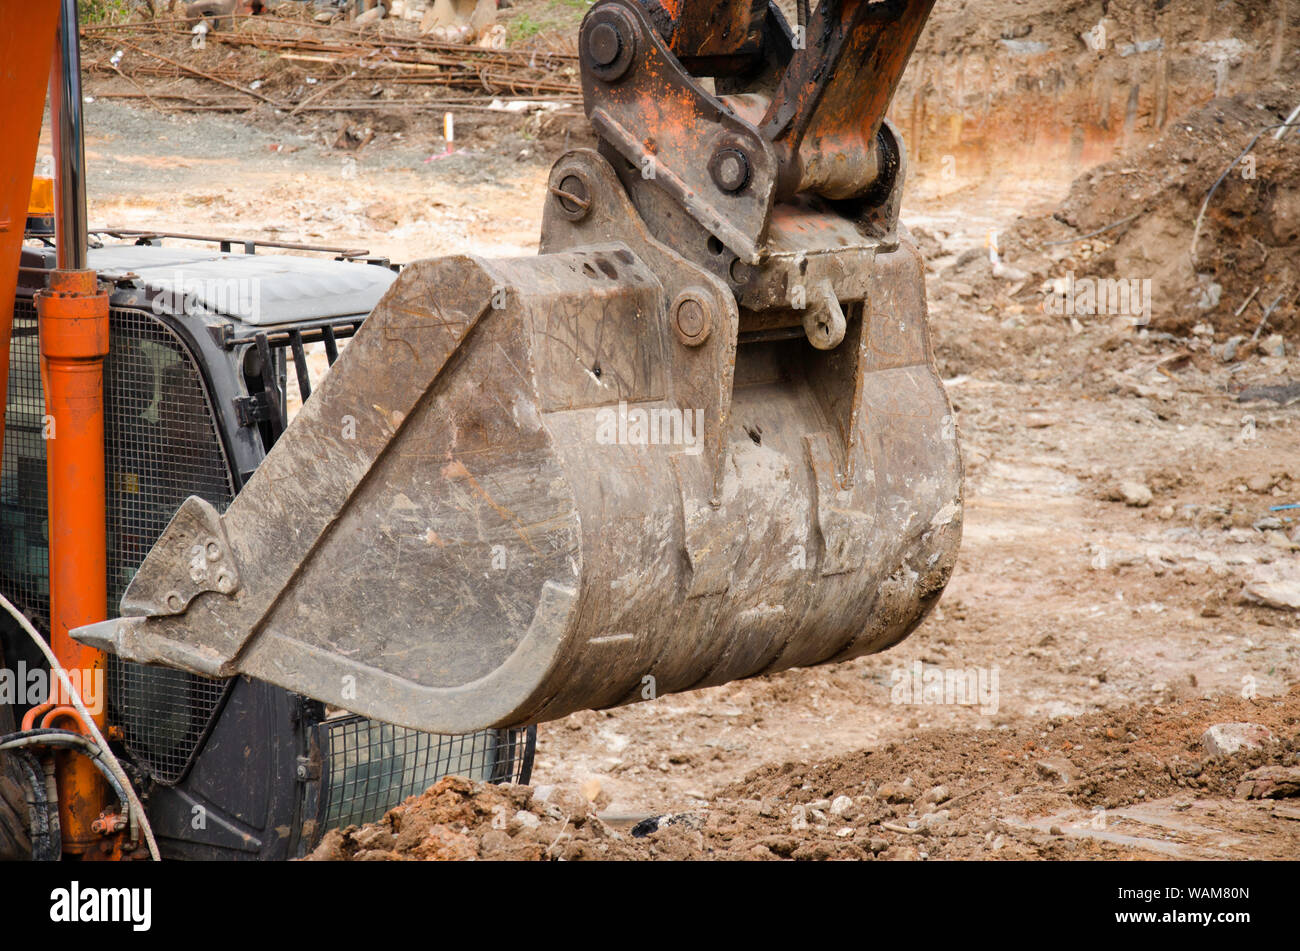 Premium Photo  A bucket excavator clears the roadside. road works. laying  a new road. loading excavator clay and a stones